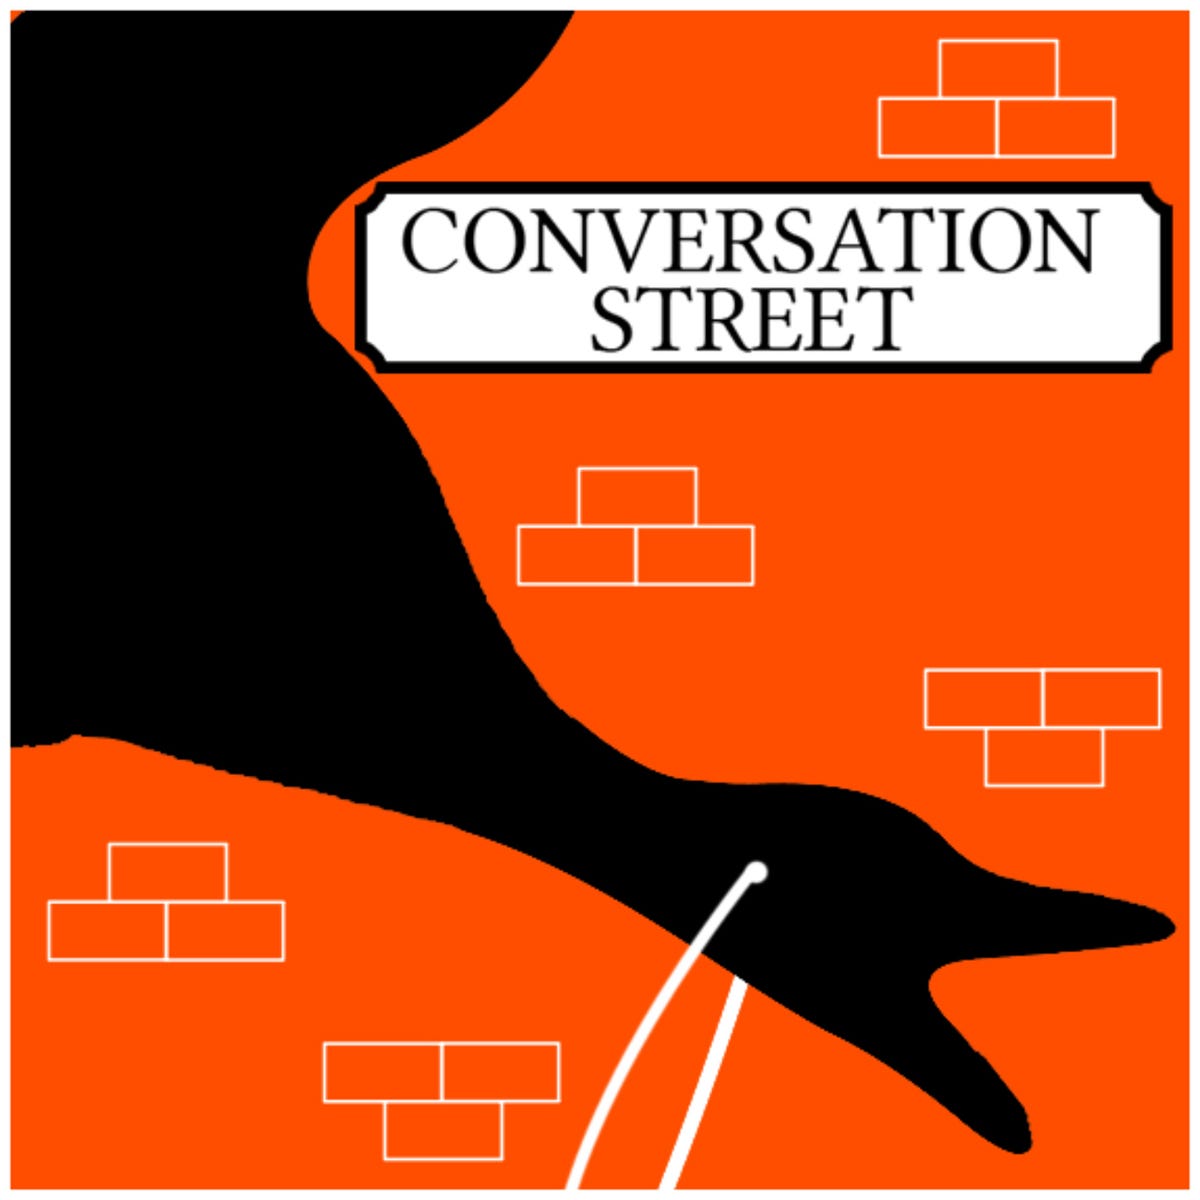 Any fans of Coronation Street should check out the — Conversation Street Podcast show for all news…